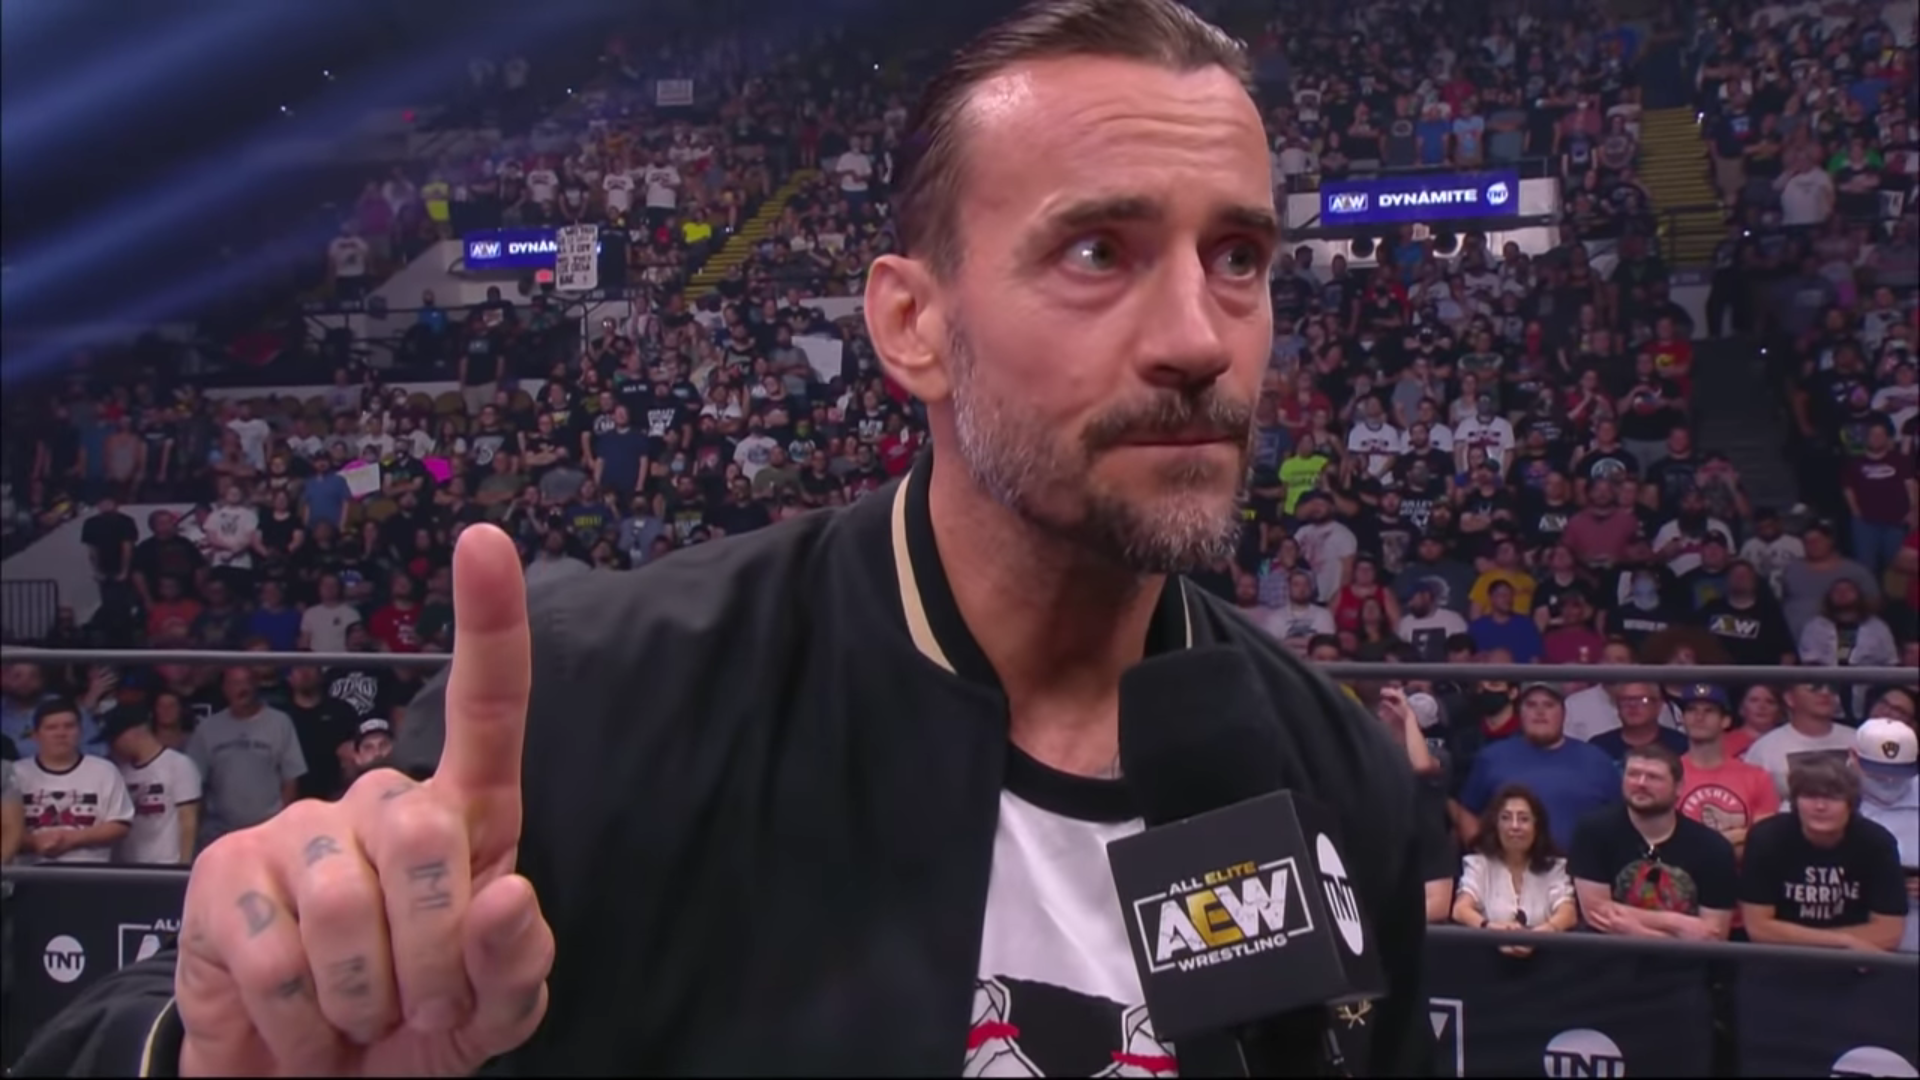 AEW star CM Punk claims he ‘would have died’ if he stayed in WWE